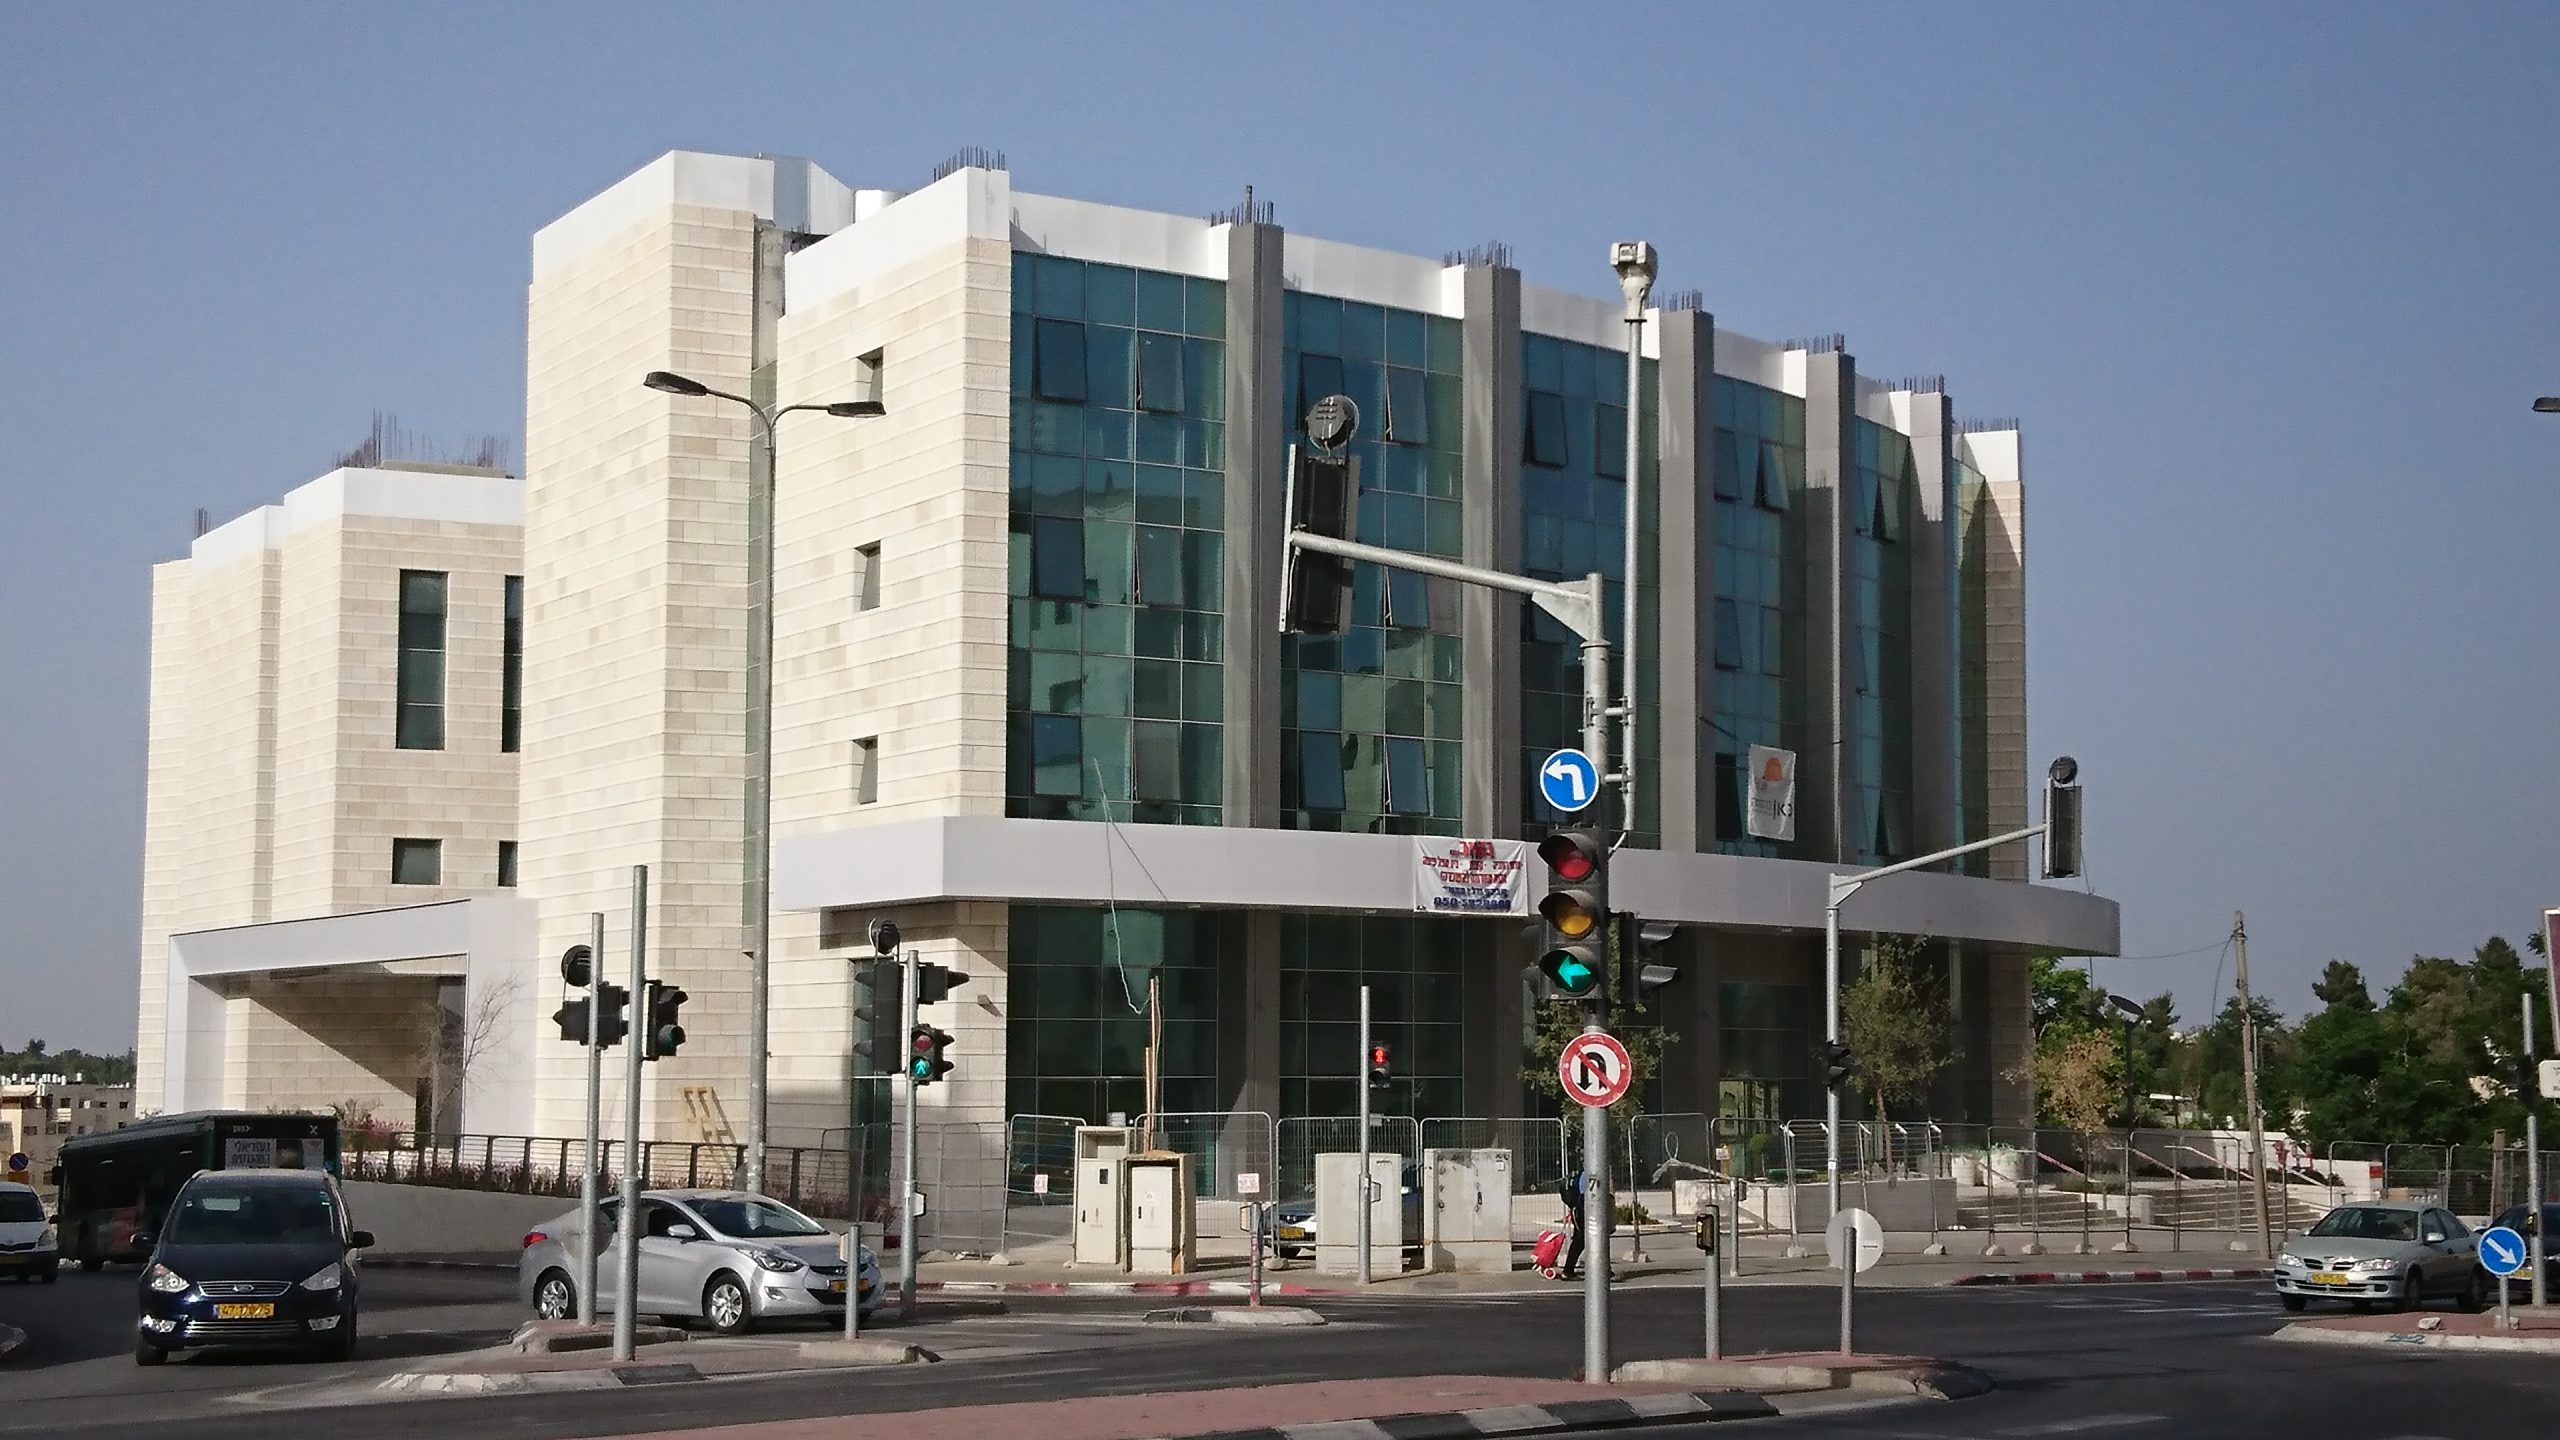 The Israel Public Broadcasting Corporation's headquarters in Jersualem.